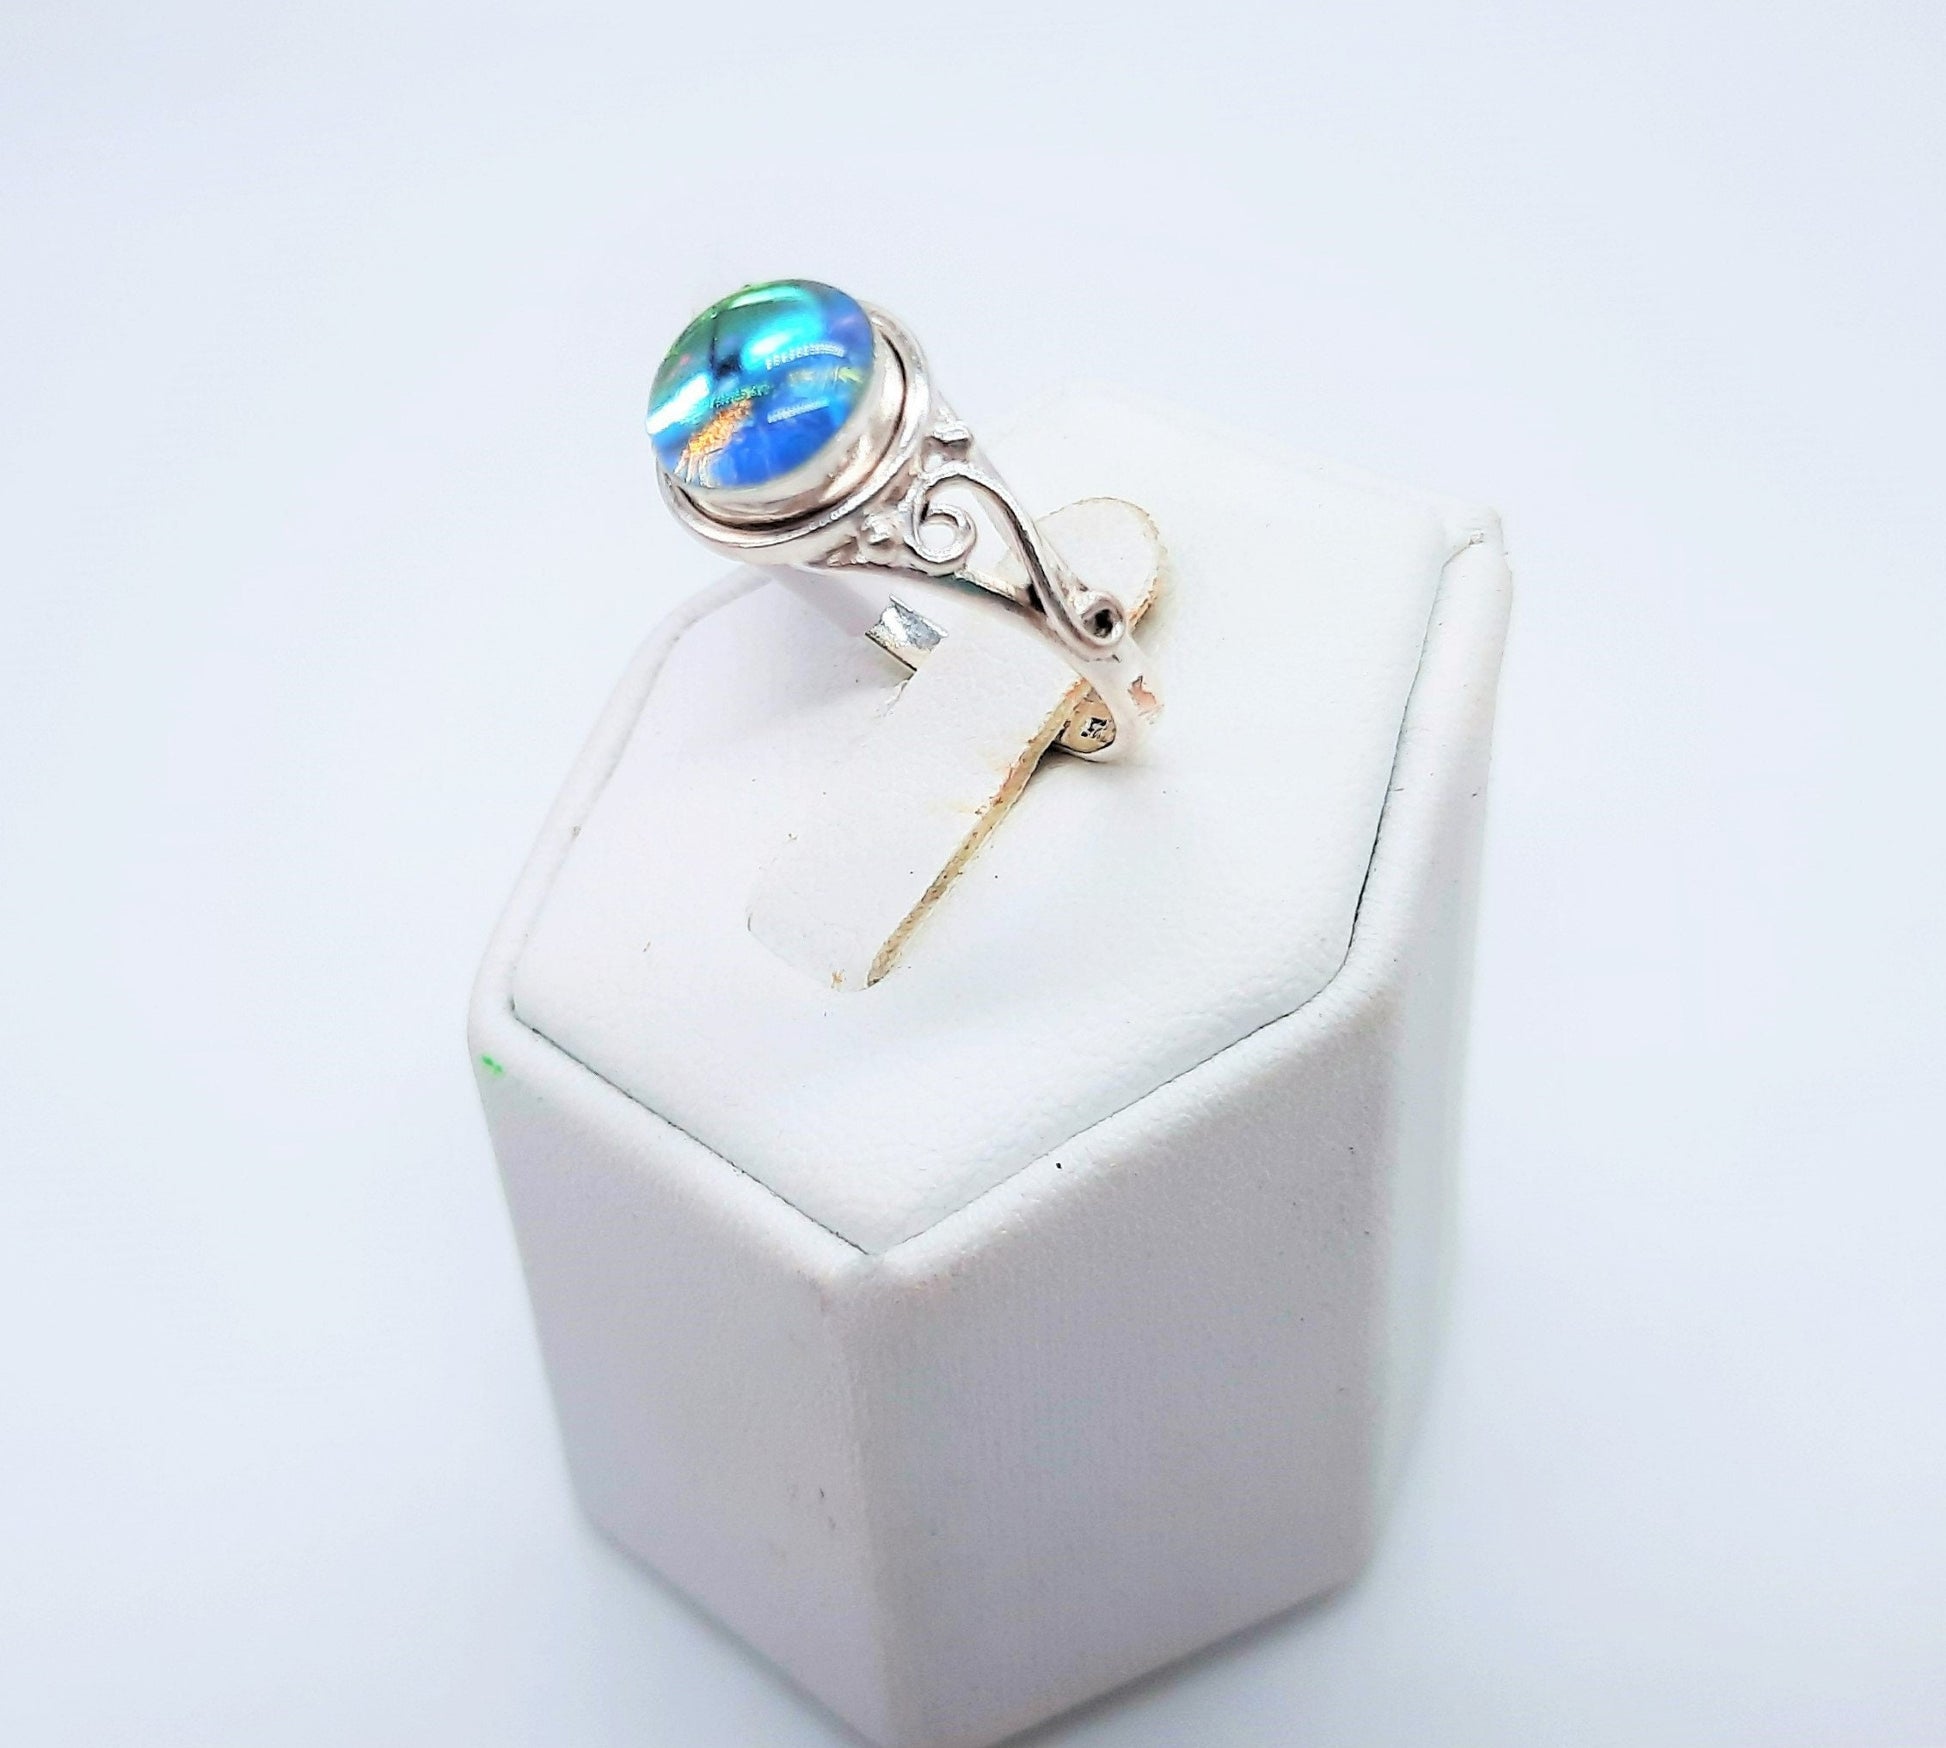 Handcrafted 925 Sterling Silver Reflective Iridescent Rainbow/ Pink / Blue / Green Mirror Ball Ring, Domed w/ Holographic Infused Resin